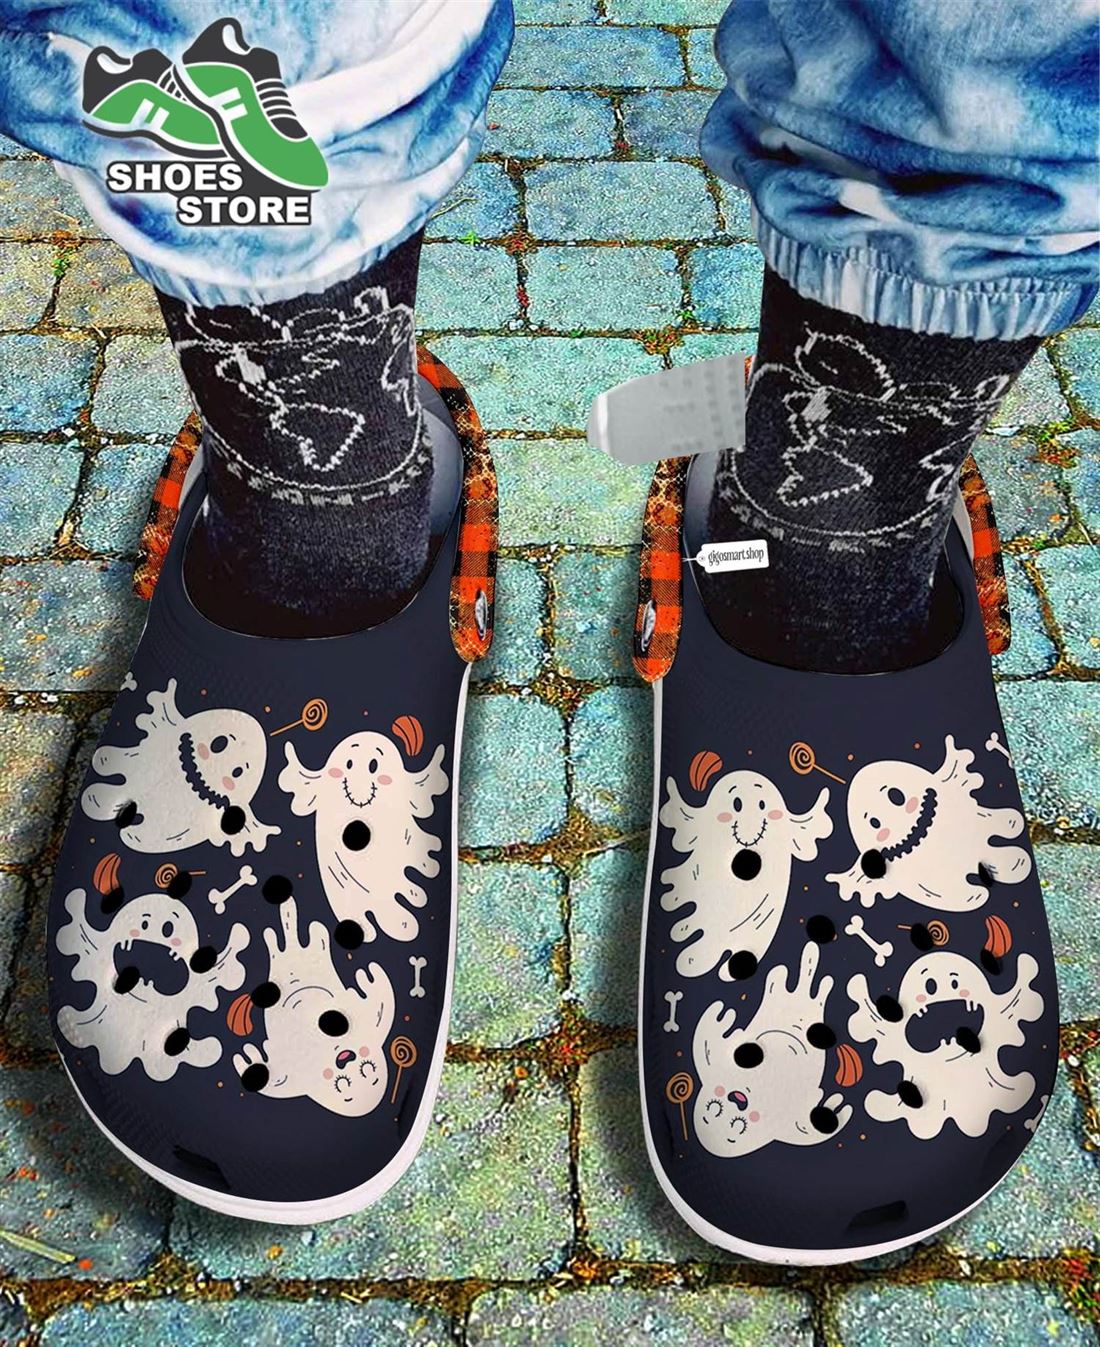 Cute Boo Ghost Dream Crocs Shoes Clogs, Ghost Lover Crocs Shoes Halloween